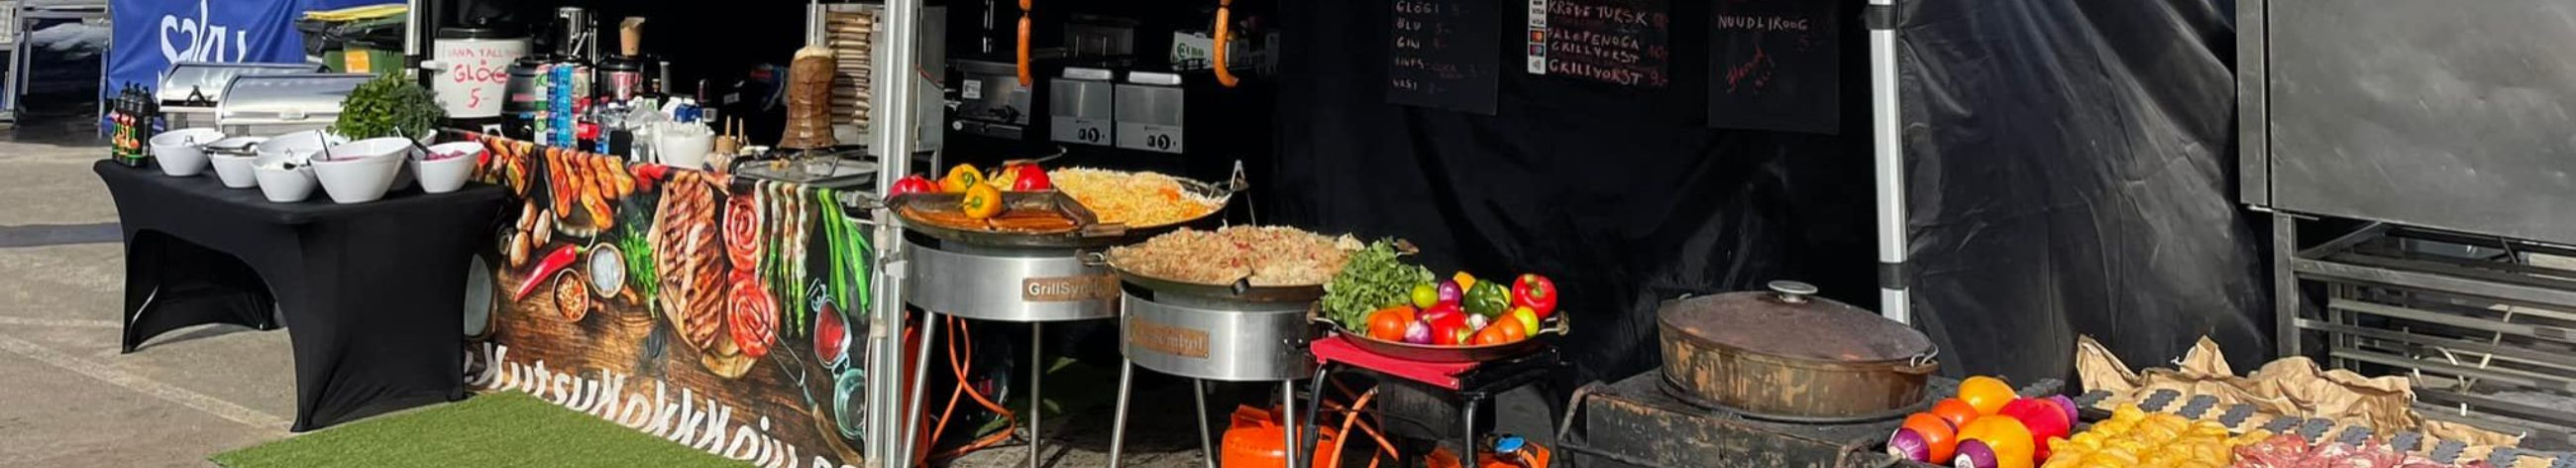 wedding parties, buffet catering, catering menu ideas, luxury catering services, catering for events, catering for outdoor events, buffet catering, family gatherings, eco-friendly options, special menus